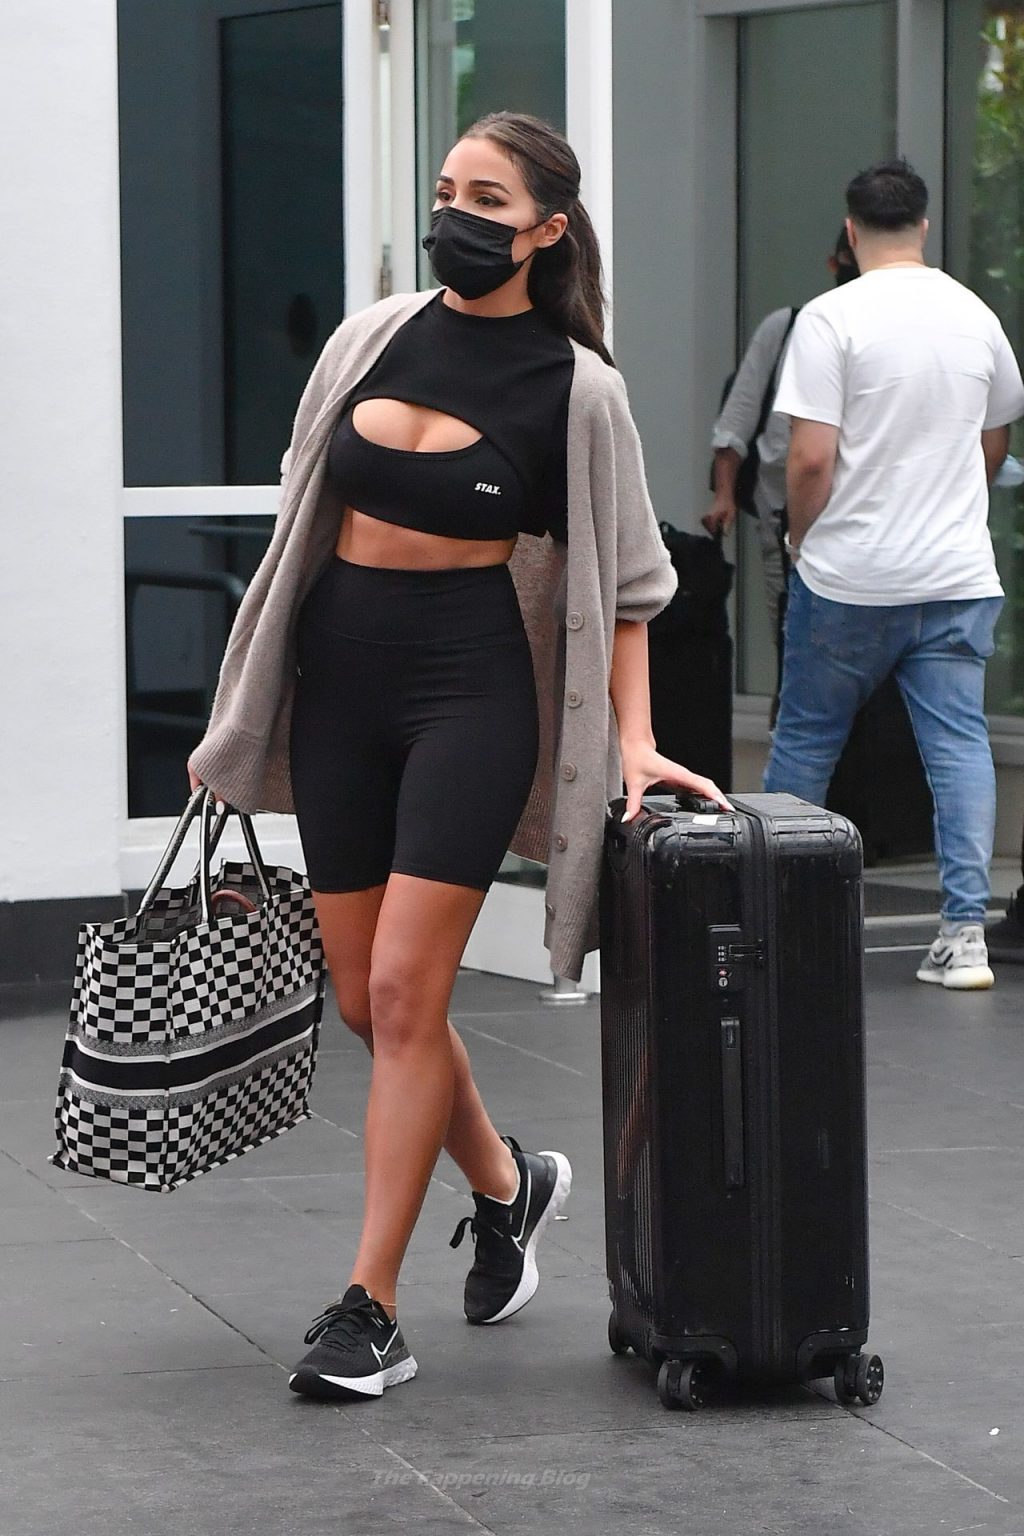 Olivia Culpo is Stylish in Athletic Gear as She Rolls Her Luggage in Miami (7 Photos)